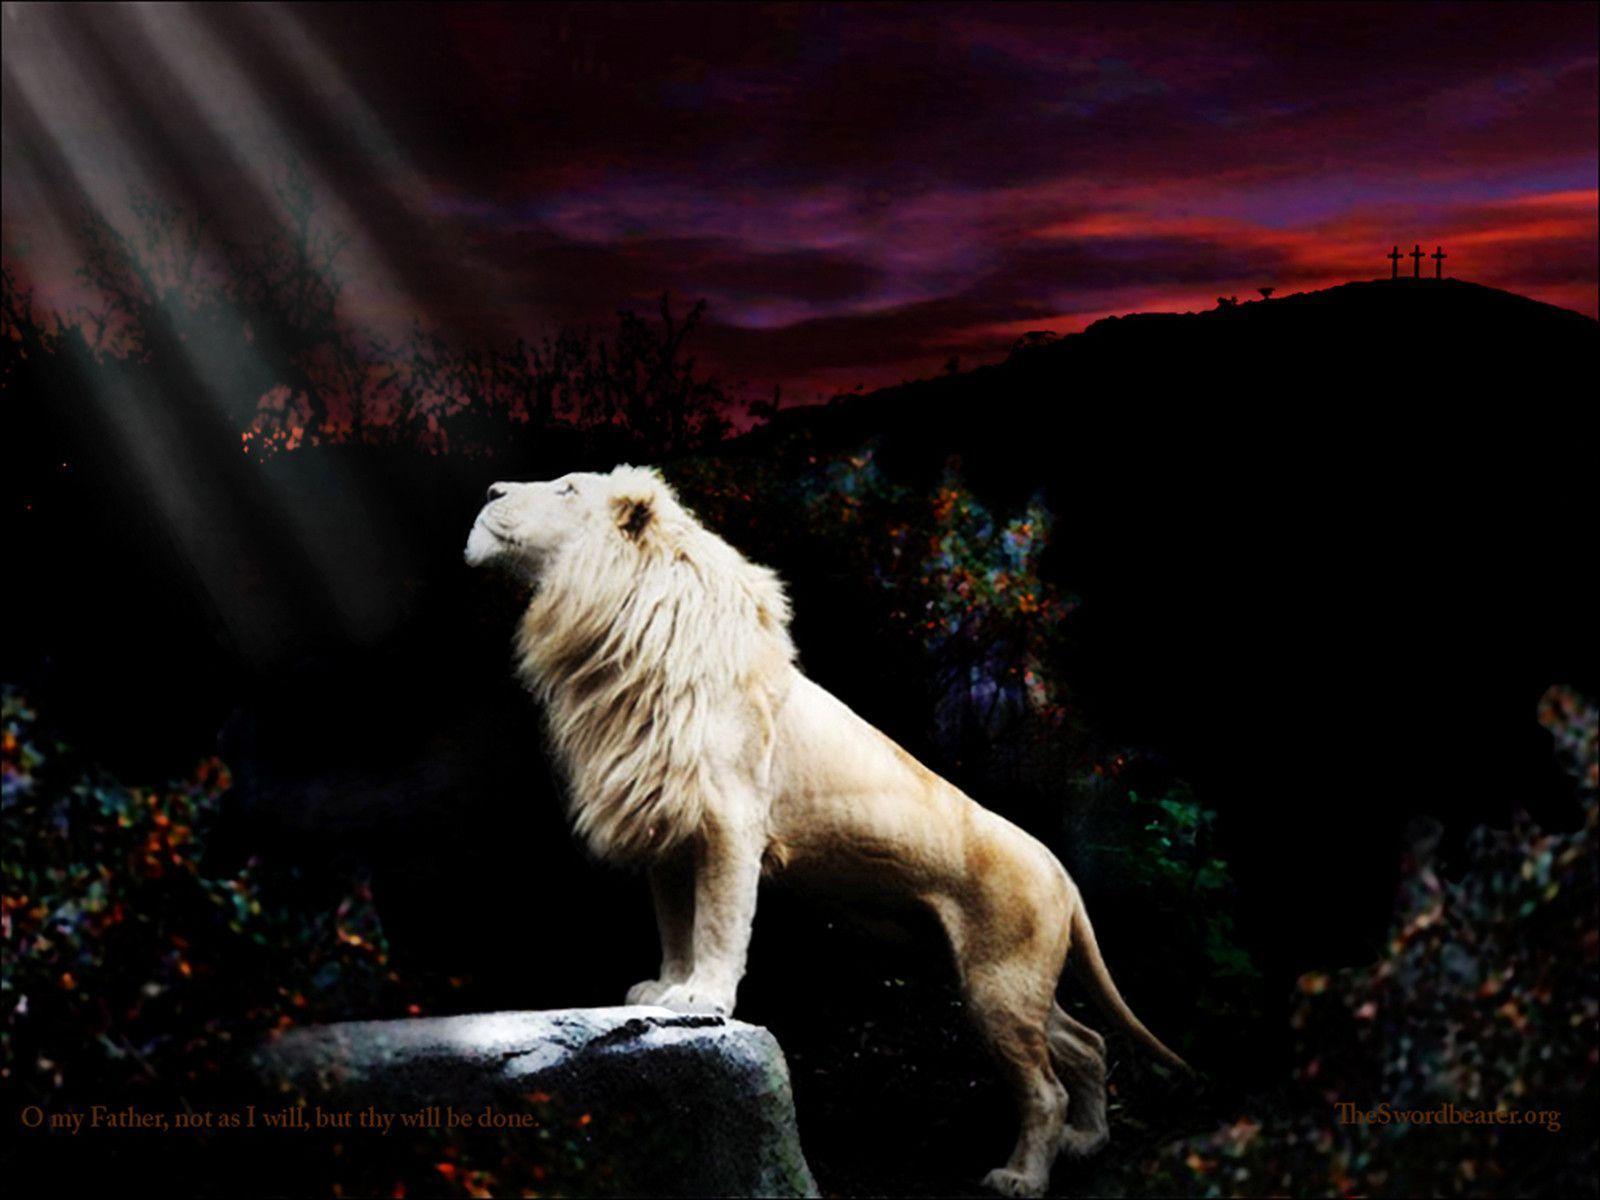 Wallpaper: The Lion of the tribe of Judah in Gethsemane